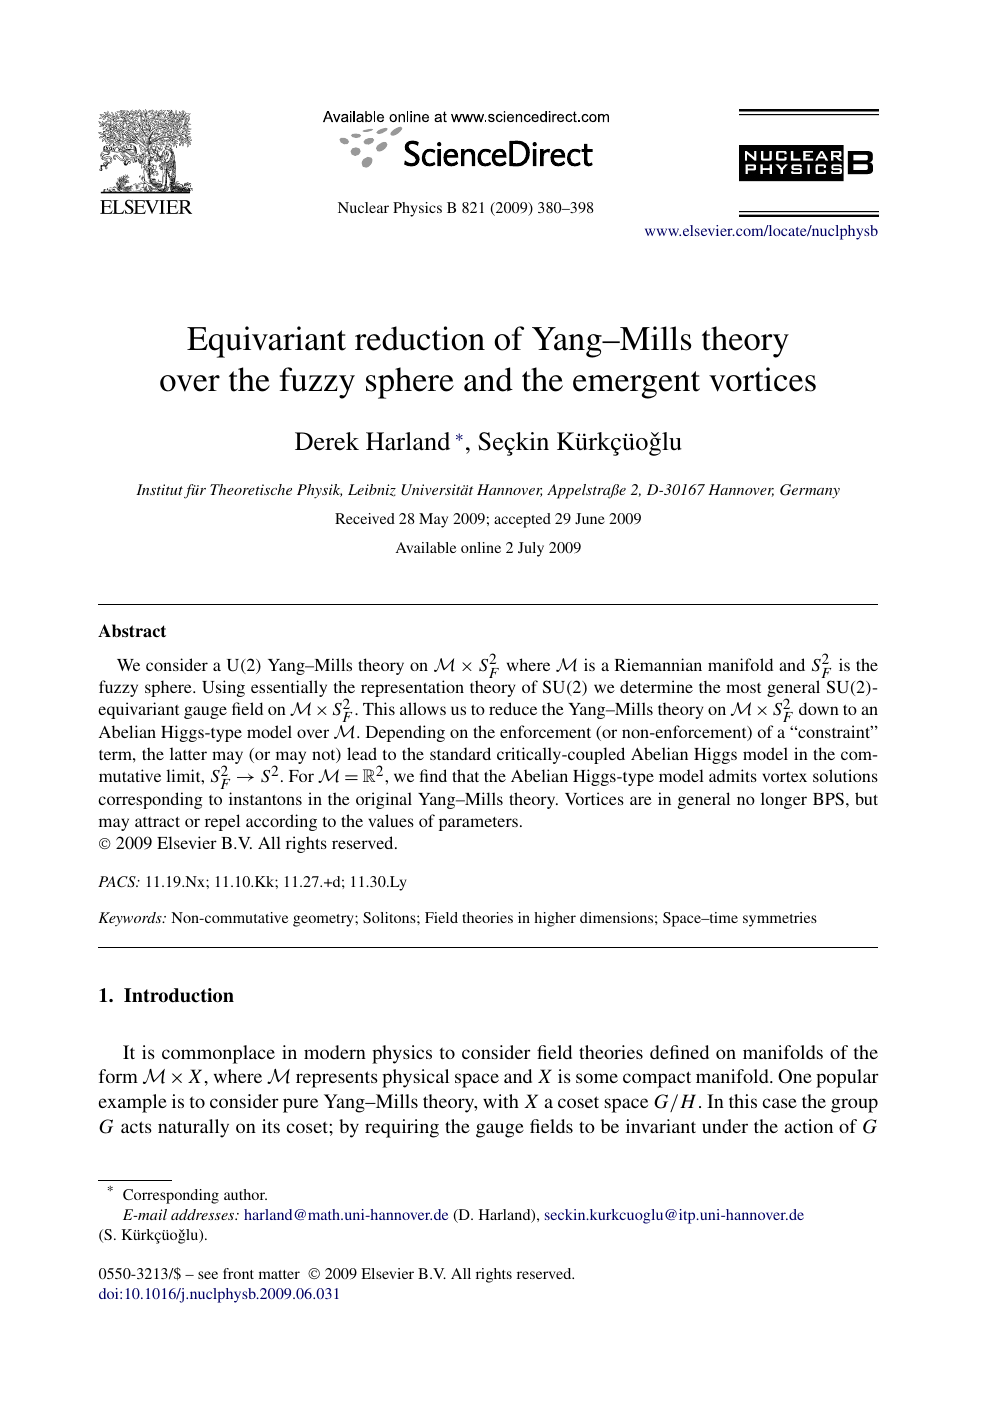 Equivariant Reduction Of Yang Mills Theory Over The Fuzzy Sphere And The Emergent Vortices Topic Of Research Paper In Physical Sciences Download Scholarly Article Pdf And Read For Free On Cyberleninka Open